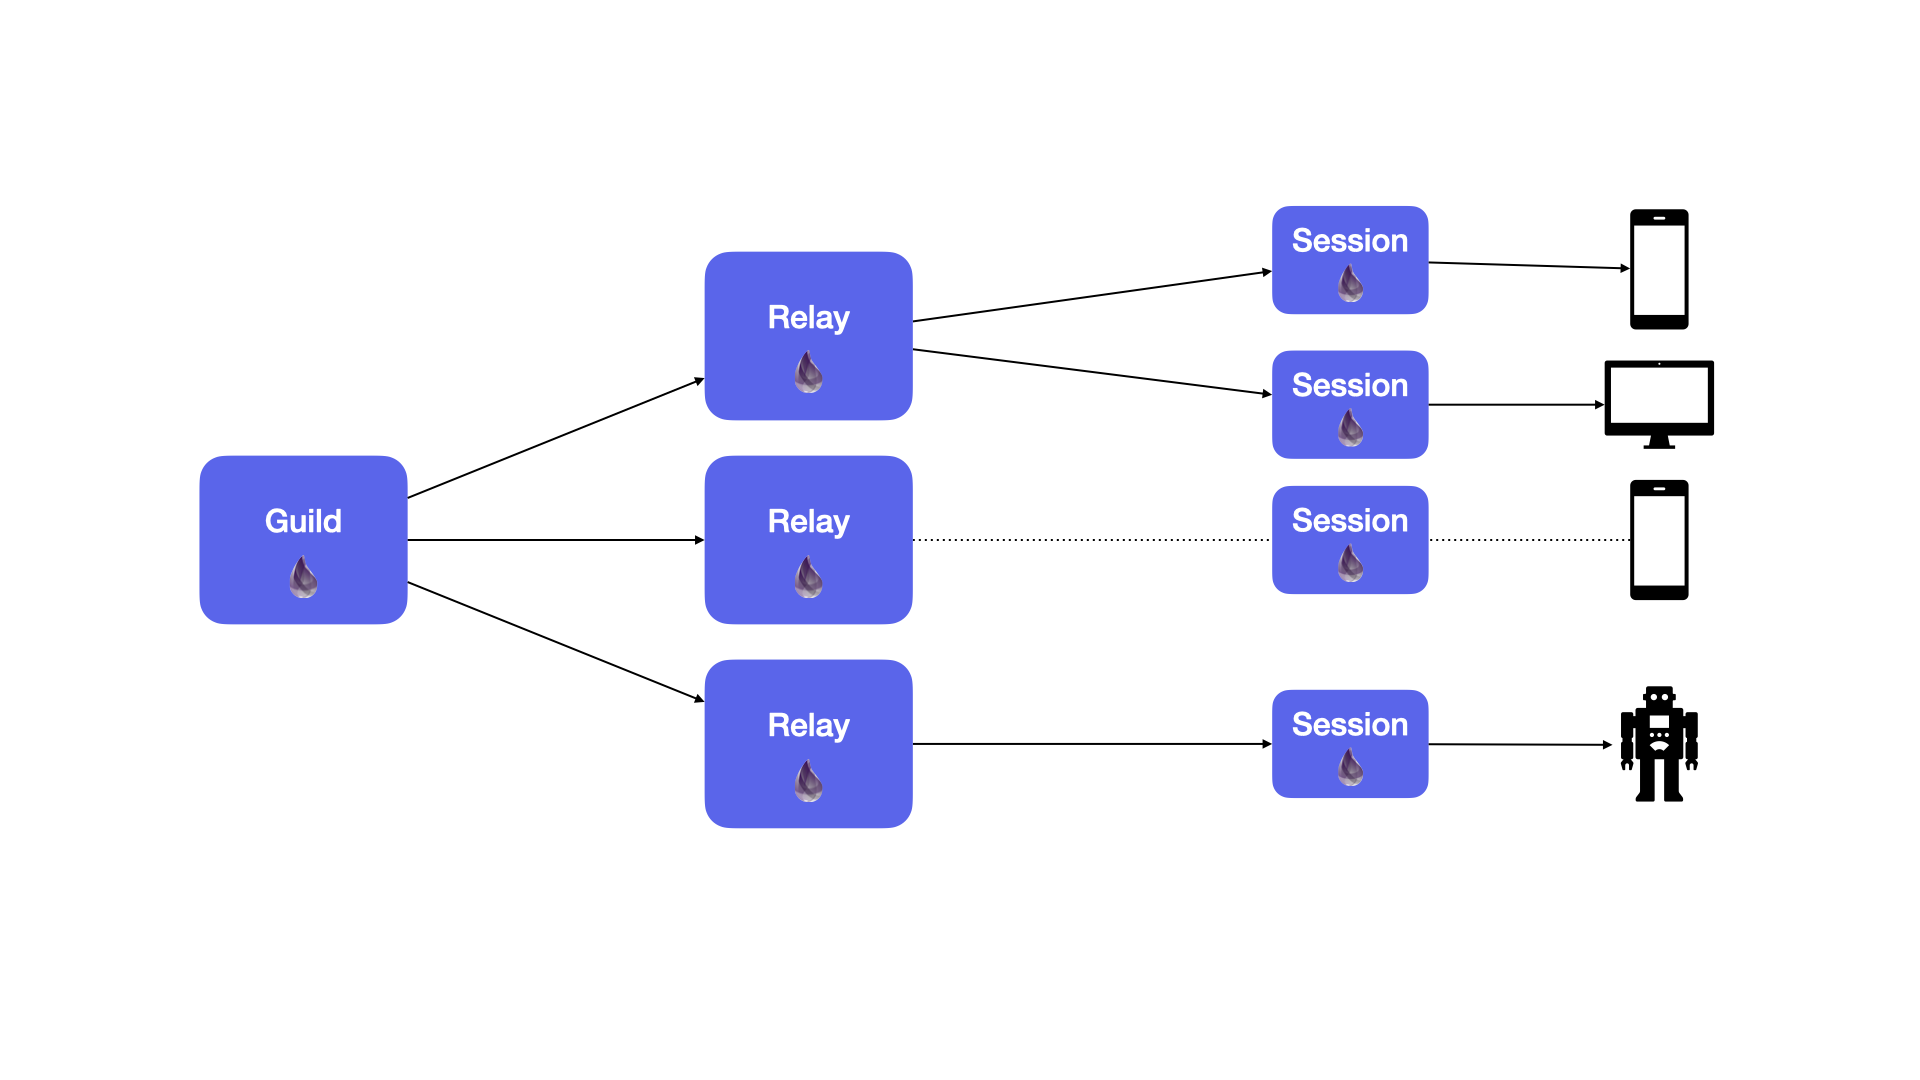 A chart representing a Guild tranferring to three separate relay sessions. One of the three Relay sessions splits off into two sessions, which move to Mobile and Desktop. The second Relay session moves to a mobile device. The third Relay session moves to a robot.